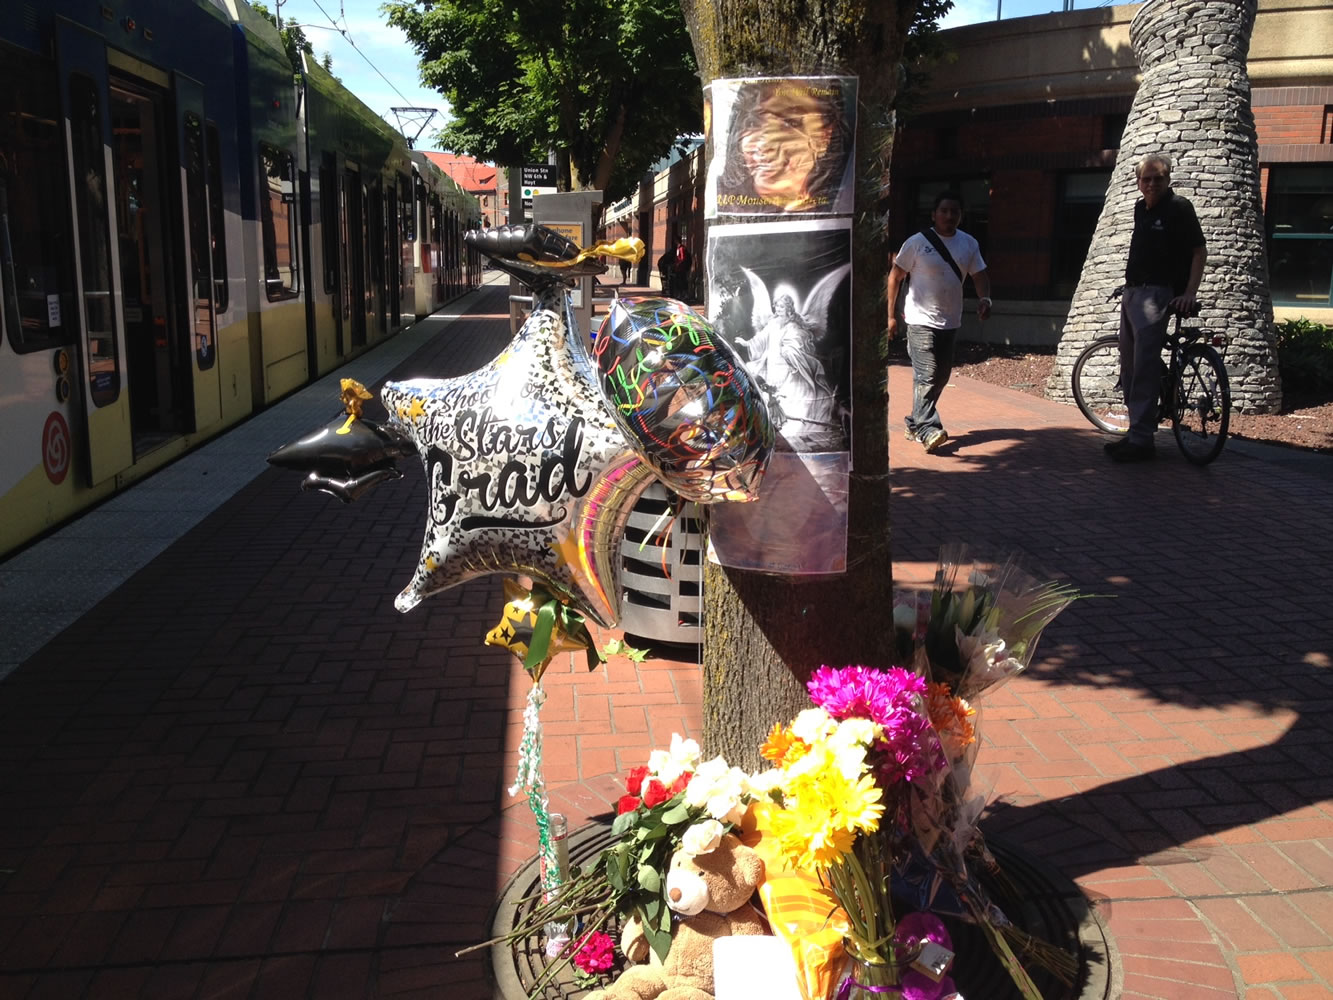 Friends and family of Hudson's Bay High School student Monserrat Hernandez-Garcia brought items to make a memorial to her in downtown Portland, near the spot she was killed by a bus on Sunday, June 8. afternoon.